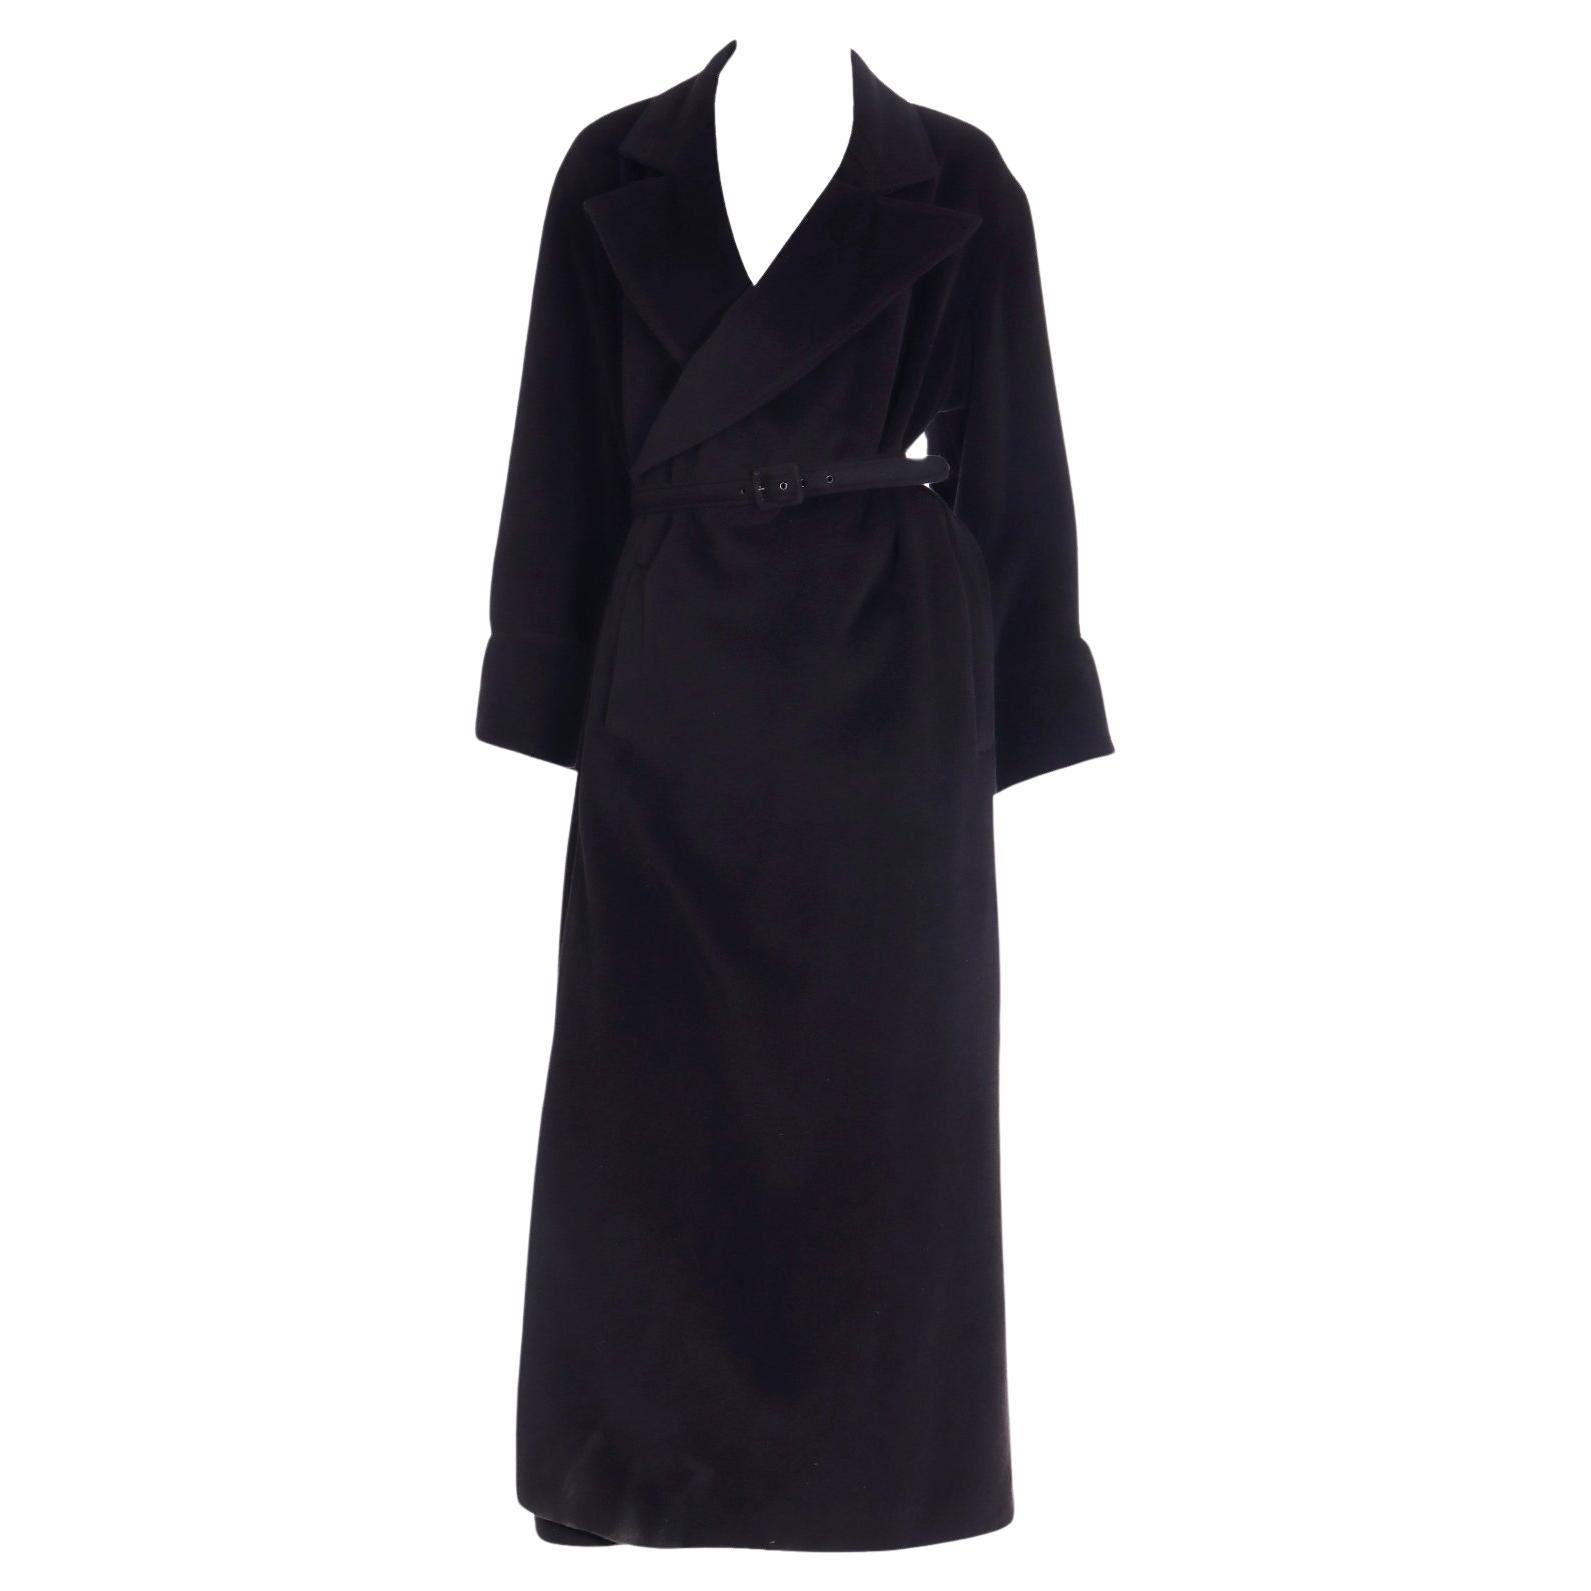 F/W 2000 Jean Paul Gaultier Black Angora Wool Coat with Belt & Signature LIning For Sale